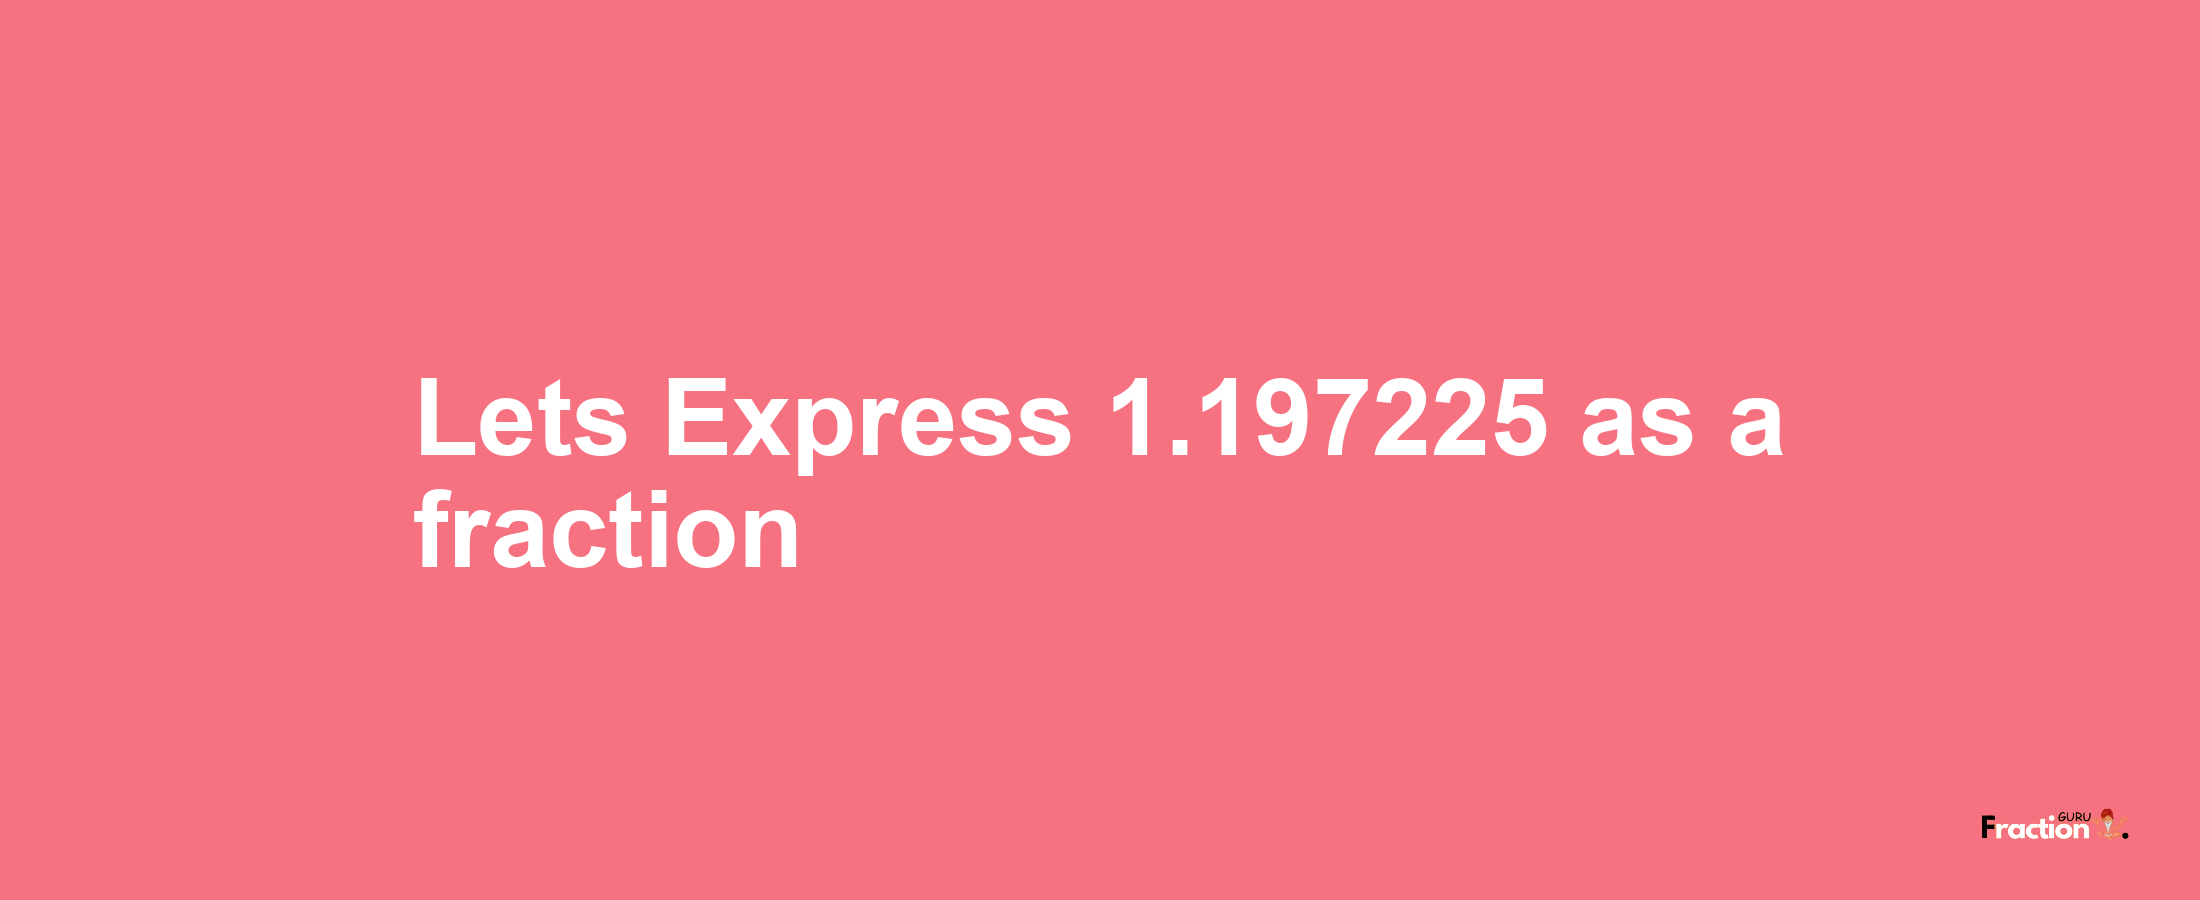 Lets Express 1.197225 as afraction